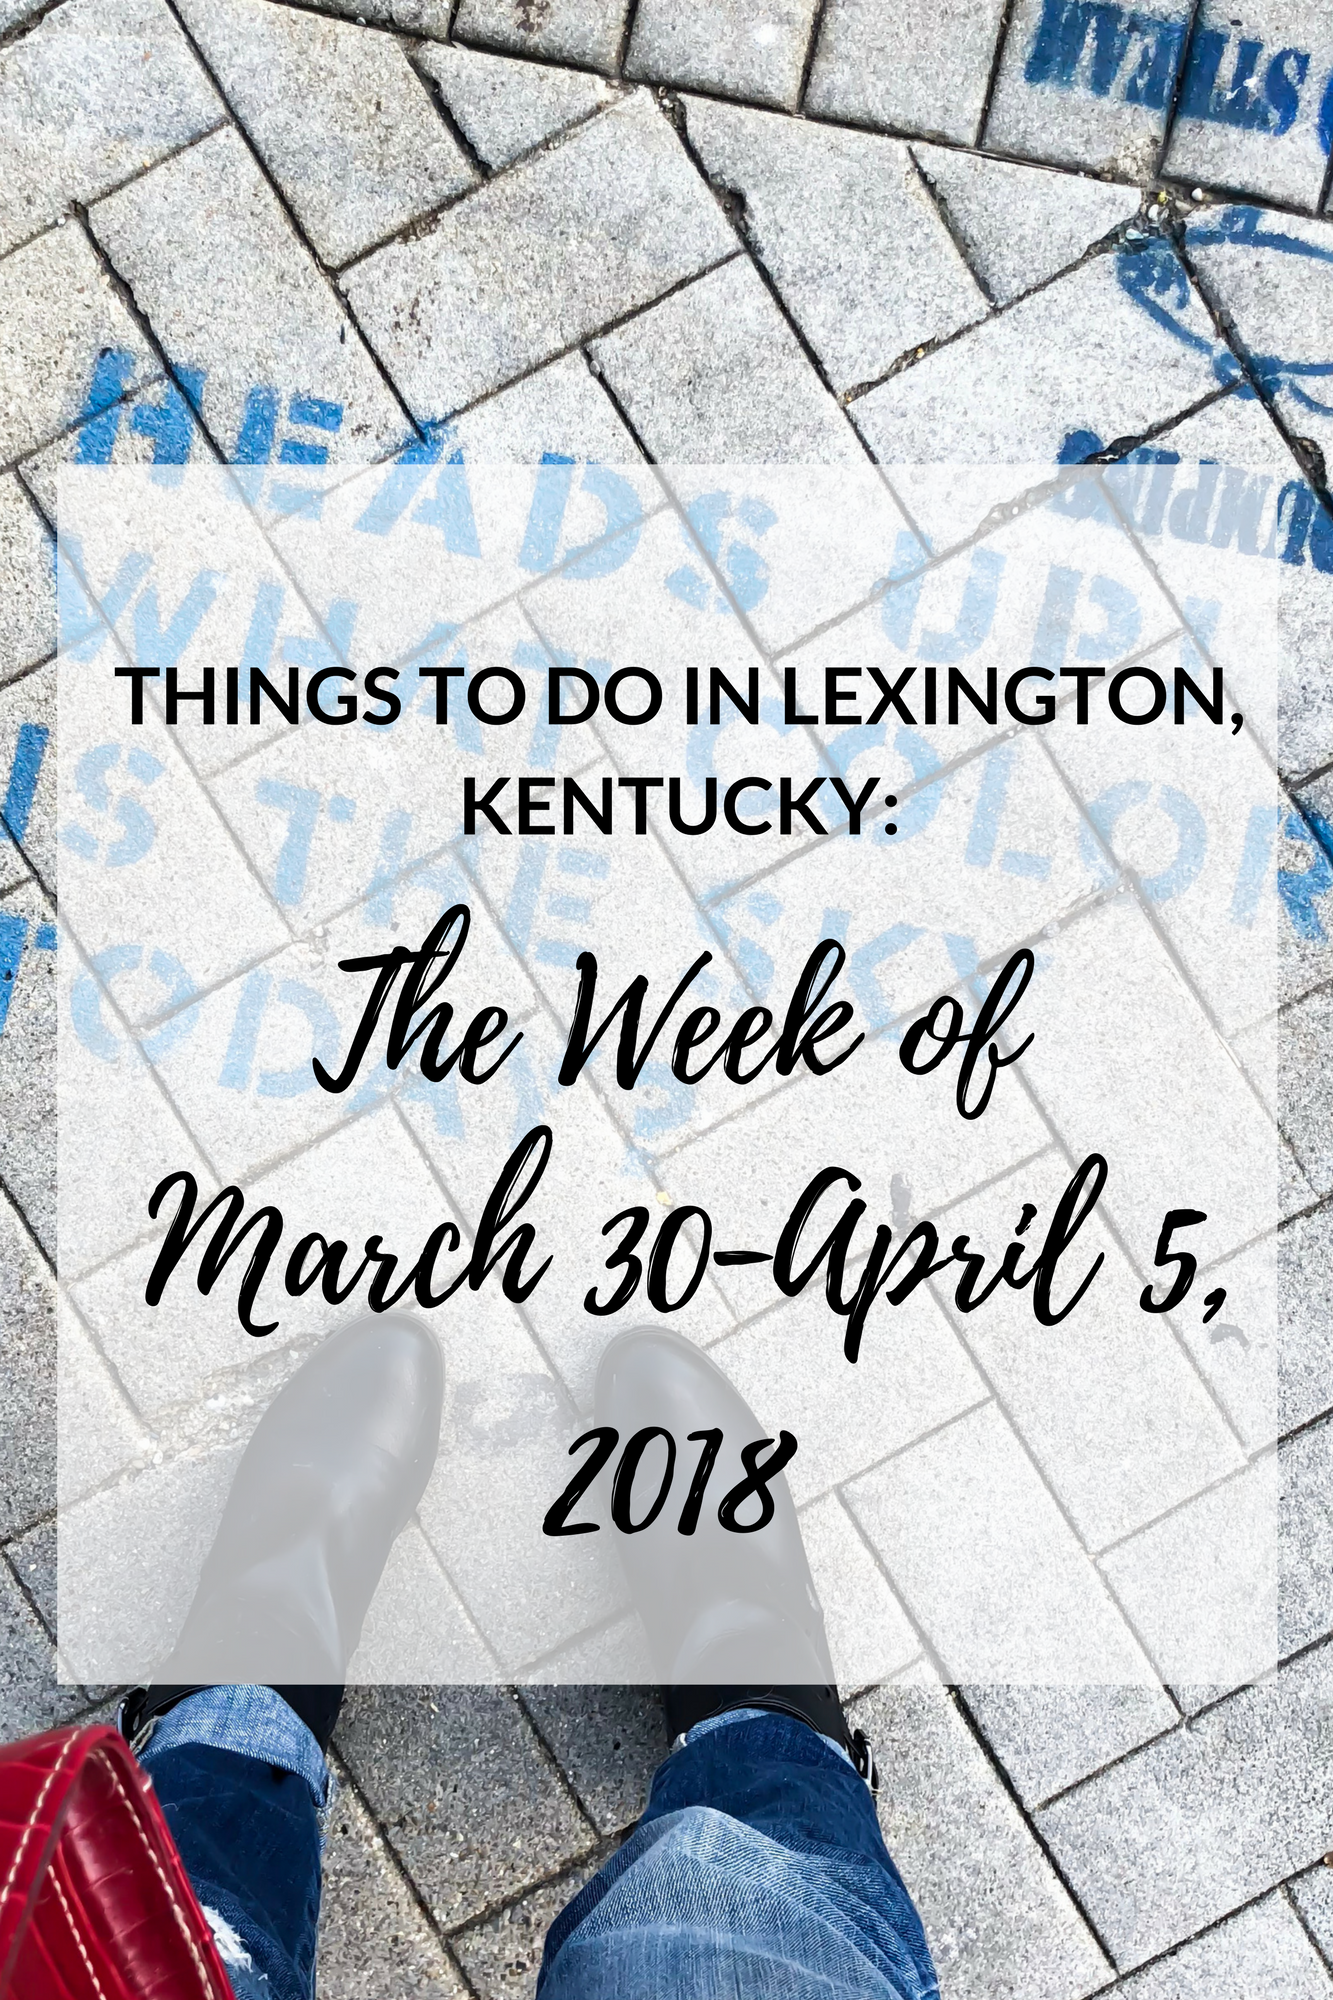 It's almost a brand new month! Where is the time going? It seems like yesterday that it was January! It's time for another list of "Things to Do in Lexington, Kentucky," so here are some ideas to hopefully keep you entertained in the upcoming week!